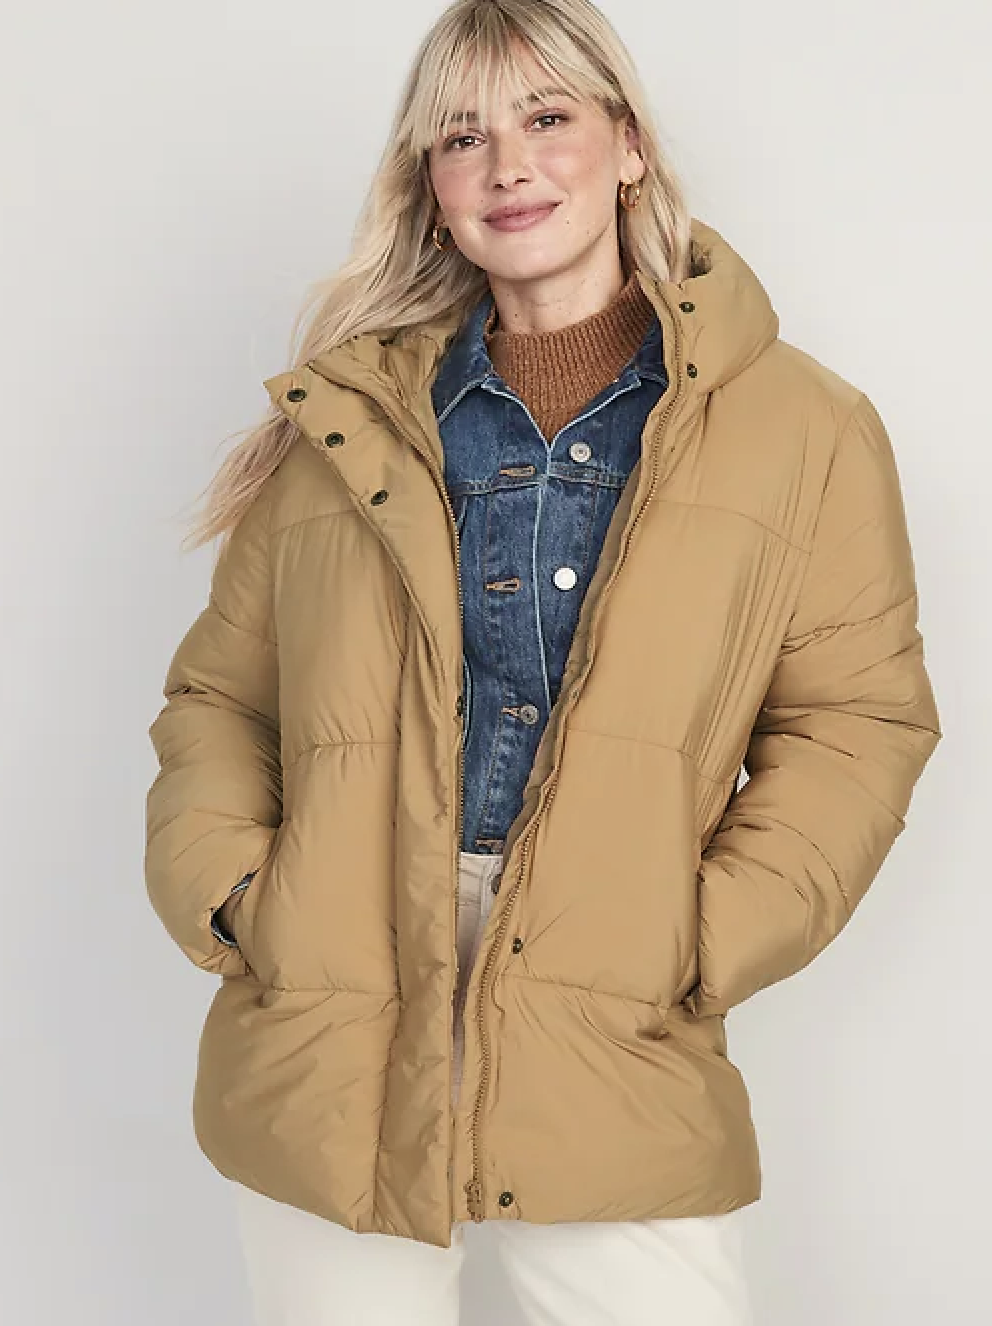 The Best Winter Coats For Every Budget - theFashionSpot